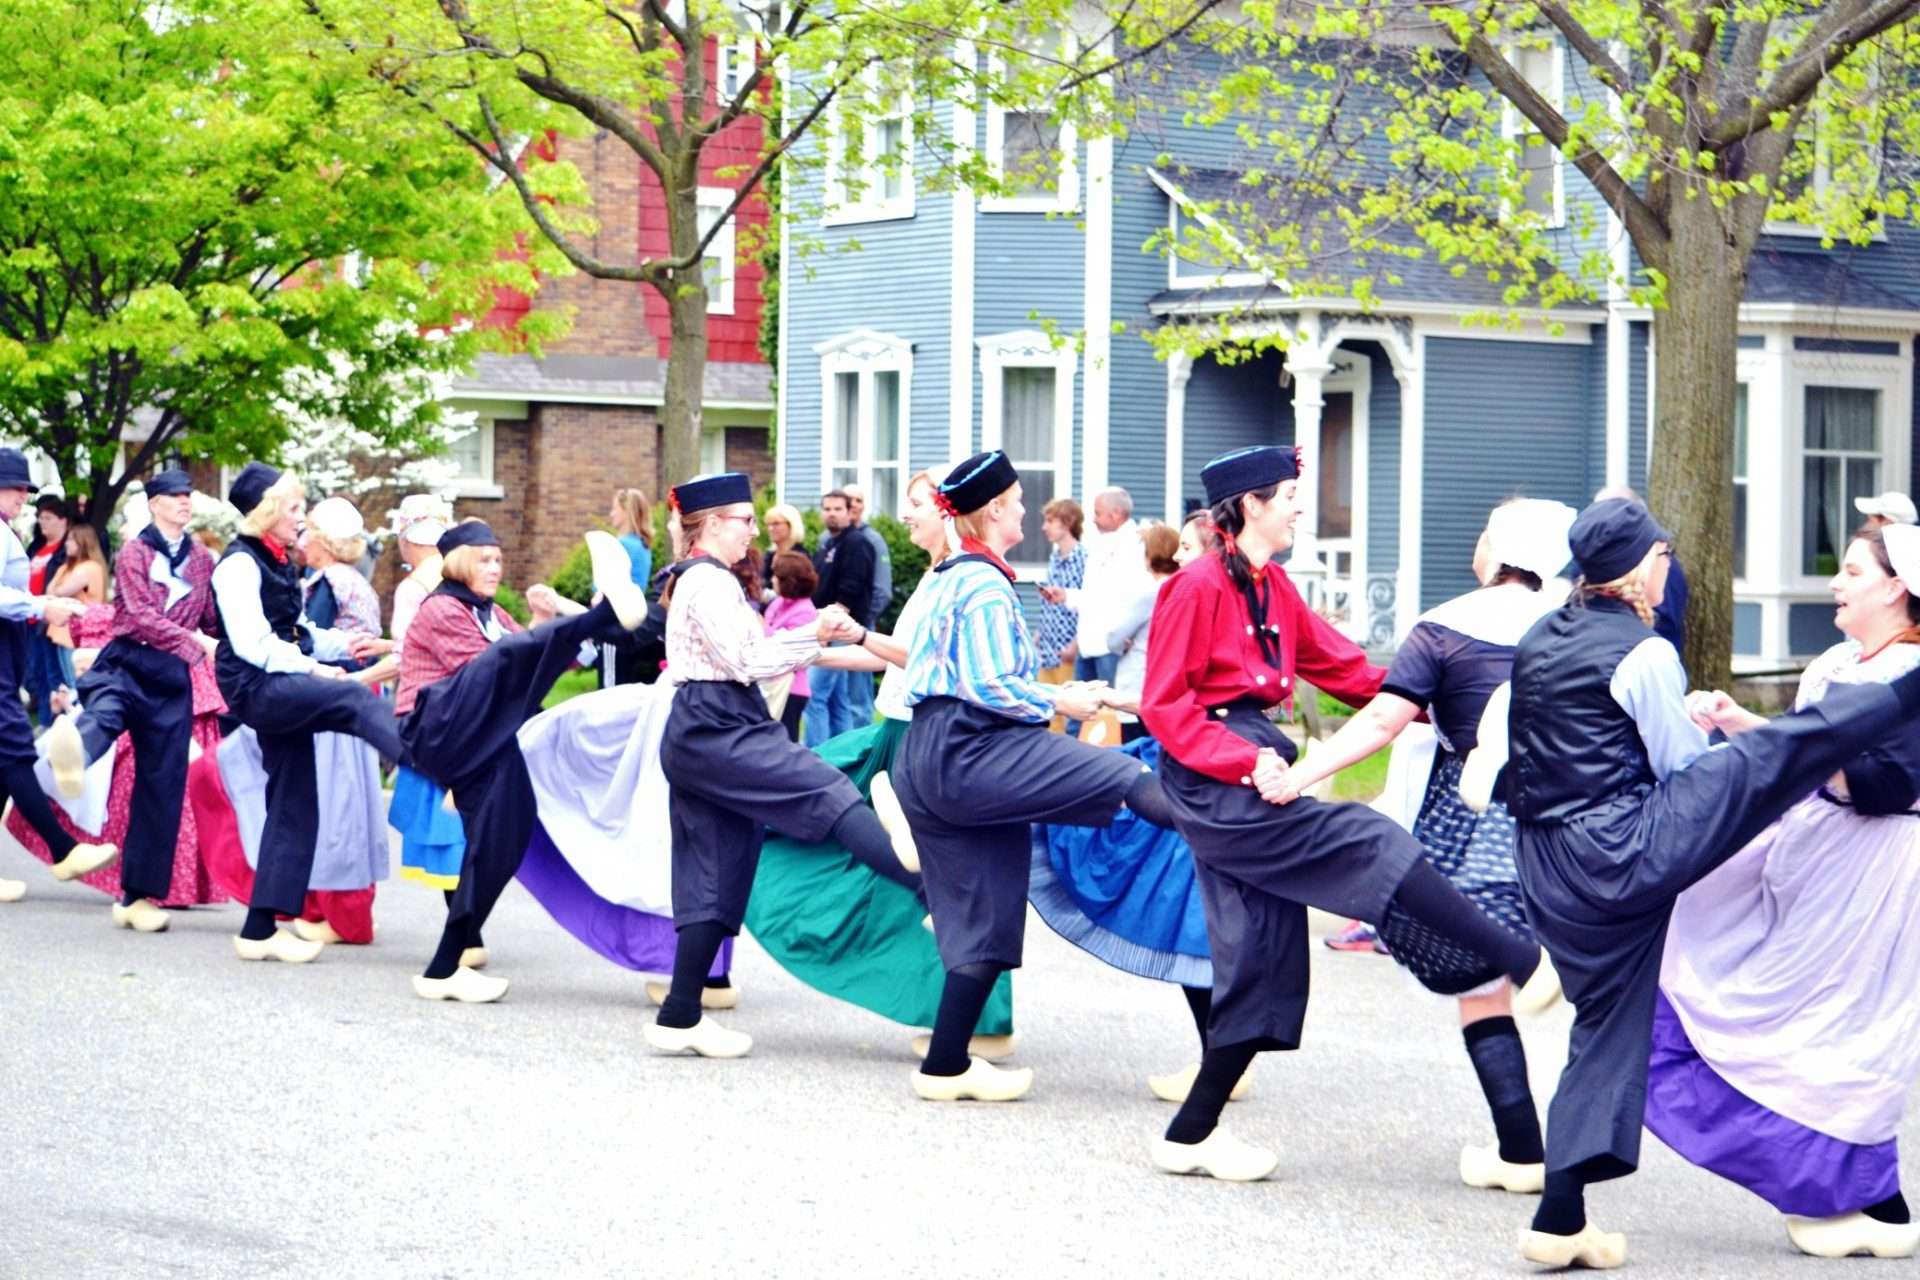 Dutch dancers performing in the street in Holland, Michigan